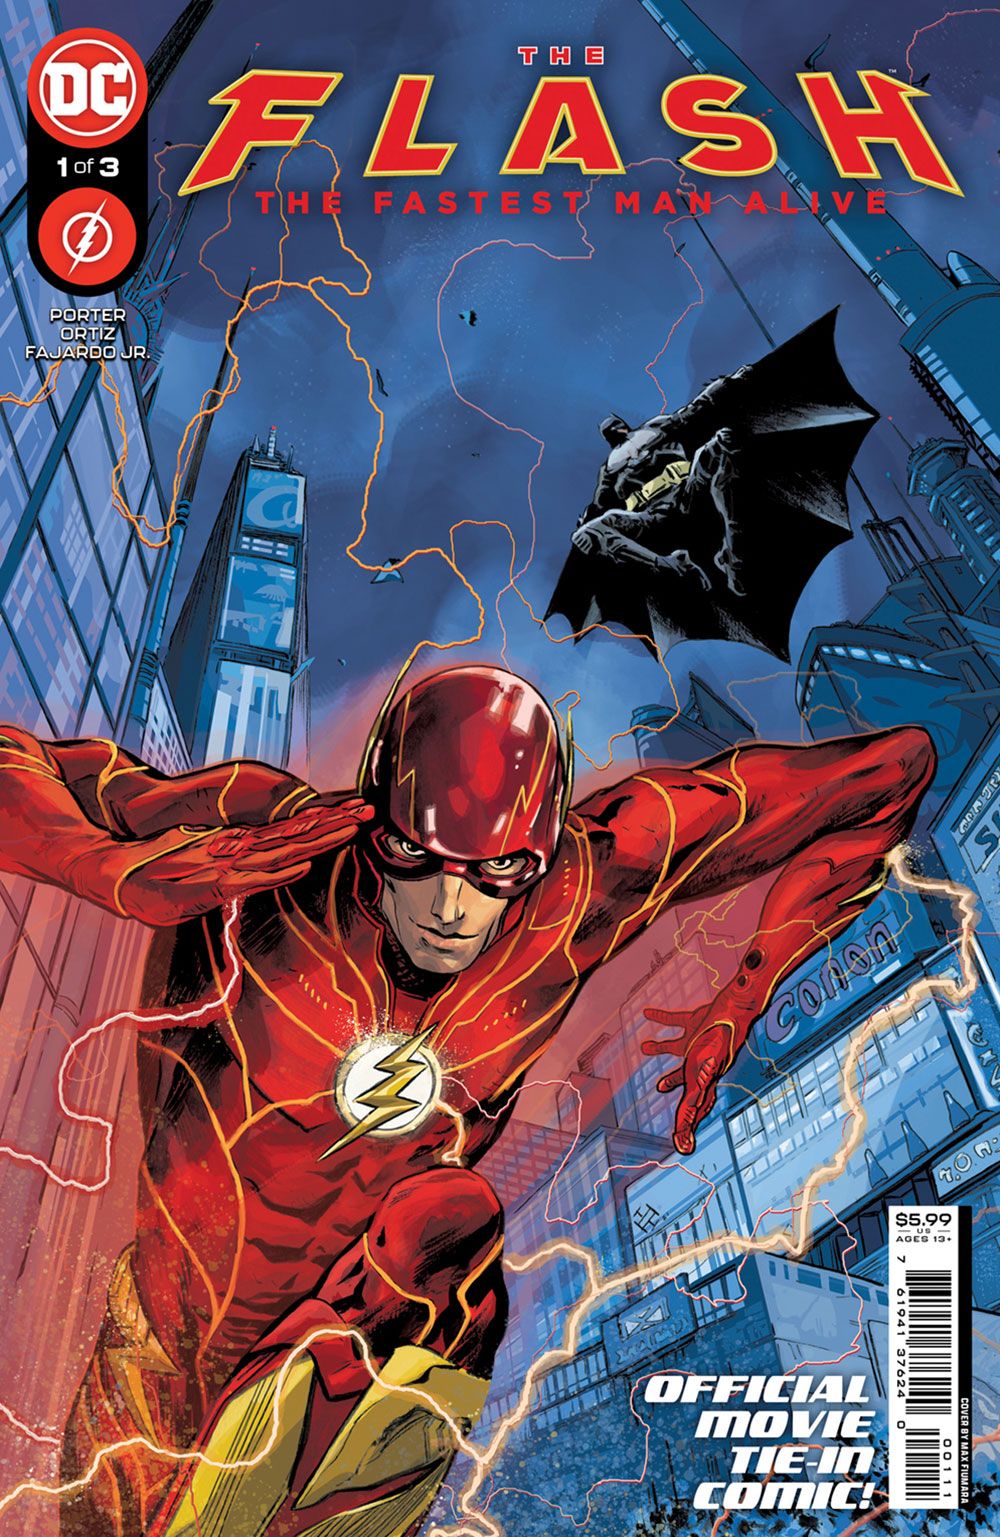 The-Flash-The-Fastest-Man-Alive-1